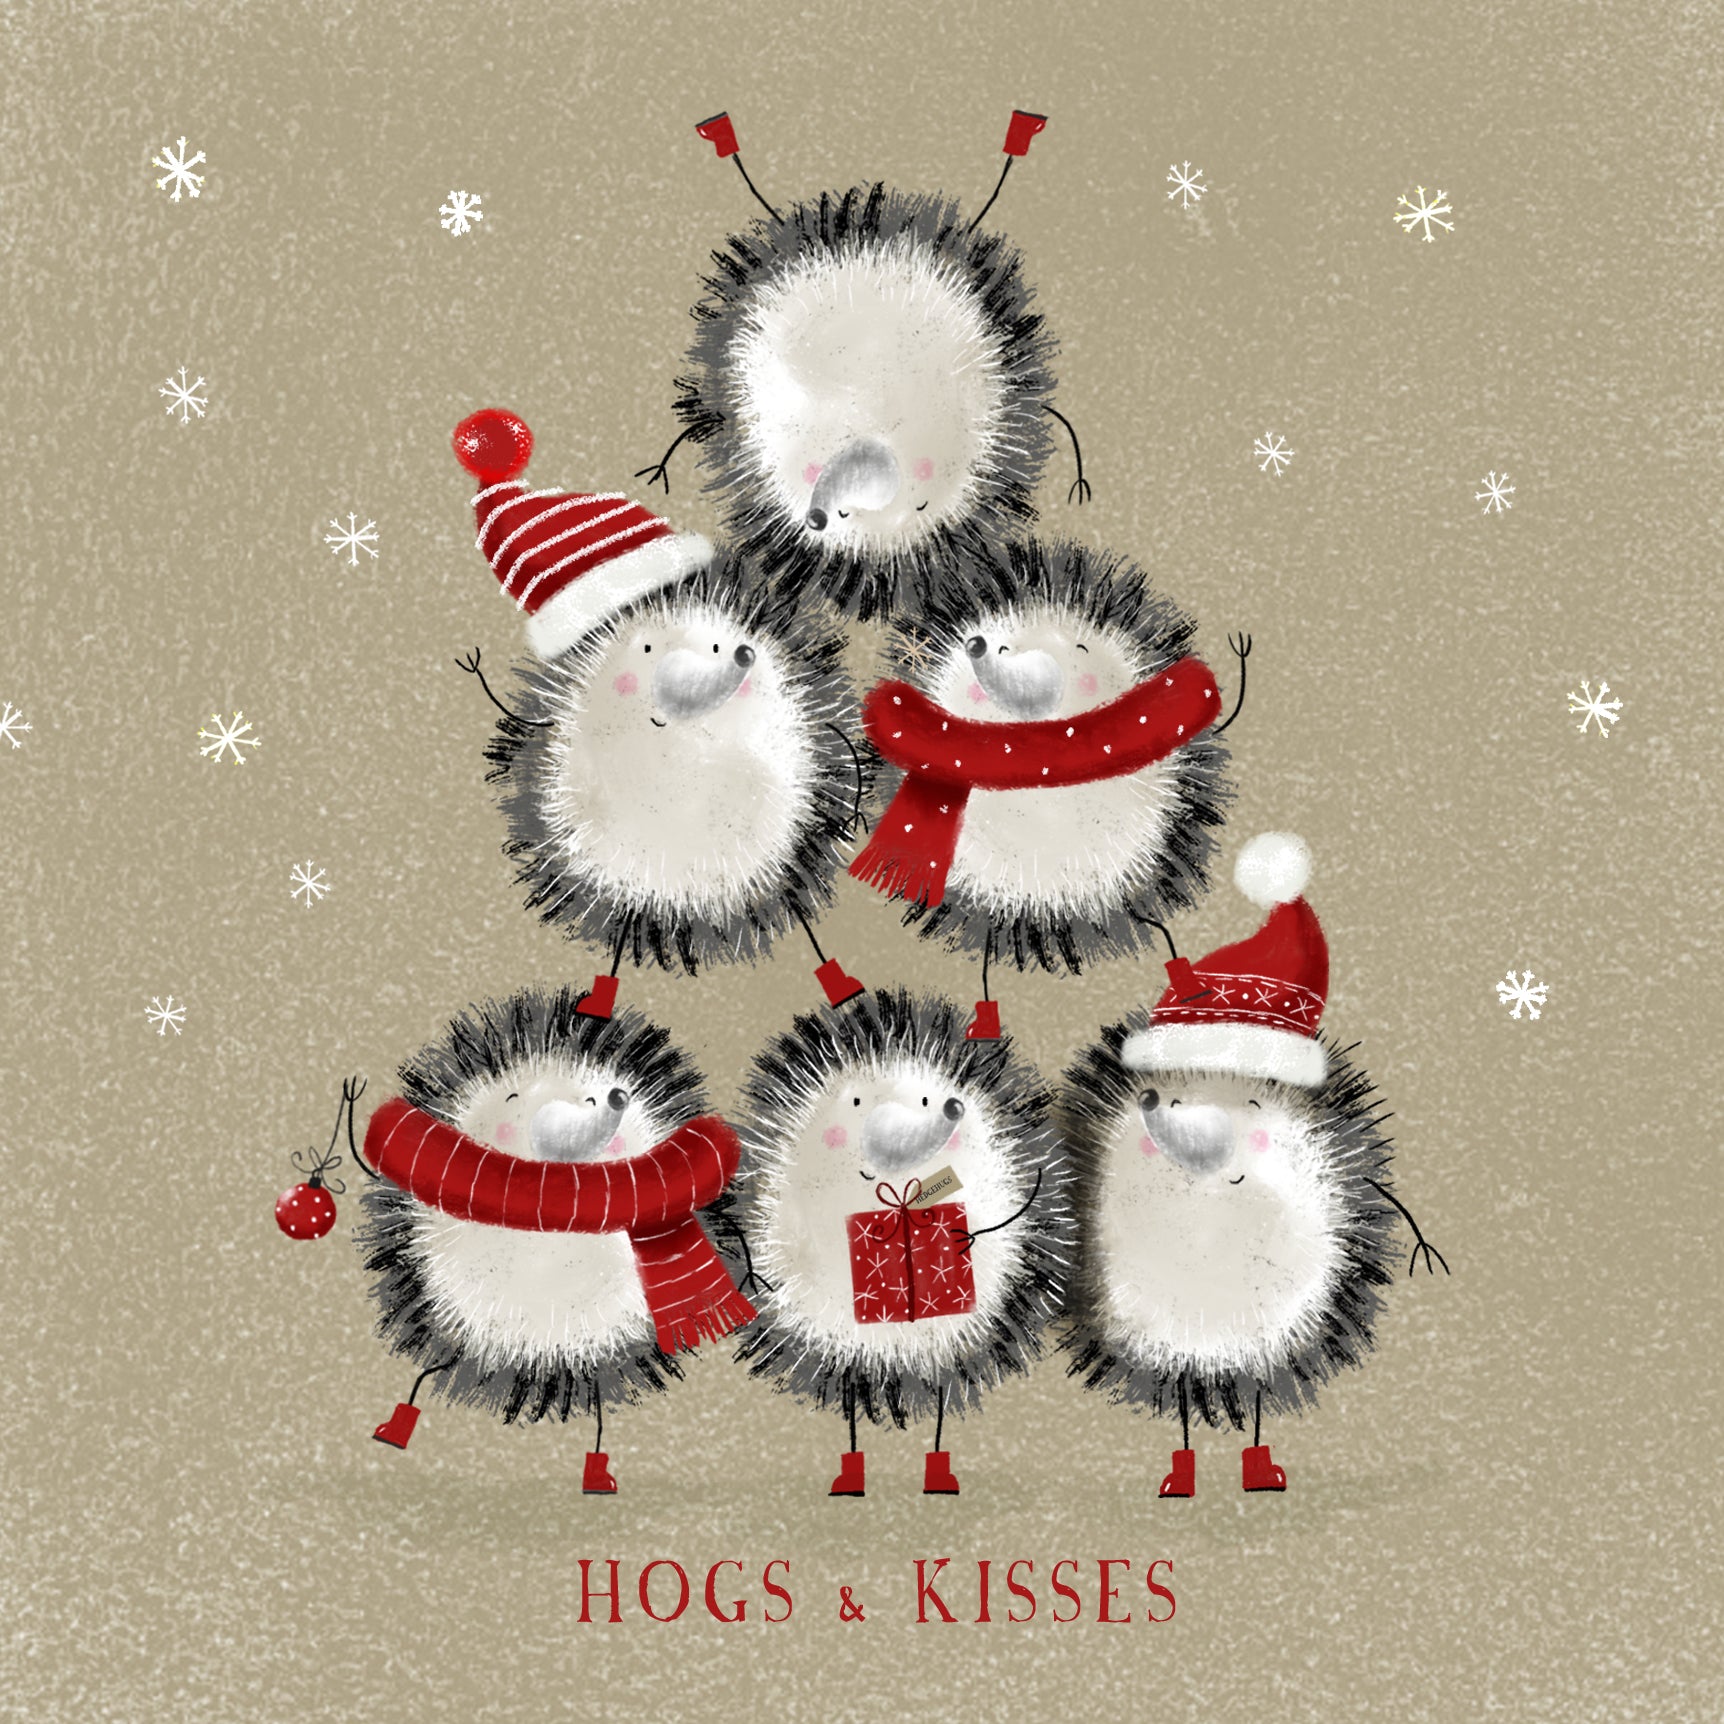 Hogs & kisses, pack of 10 cards